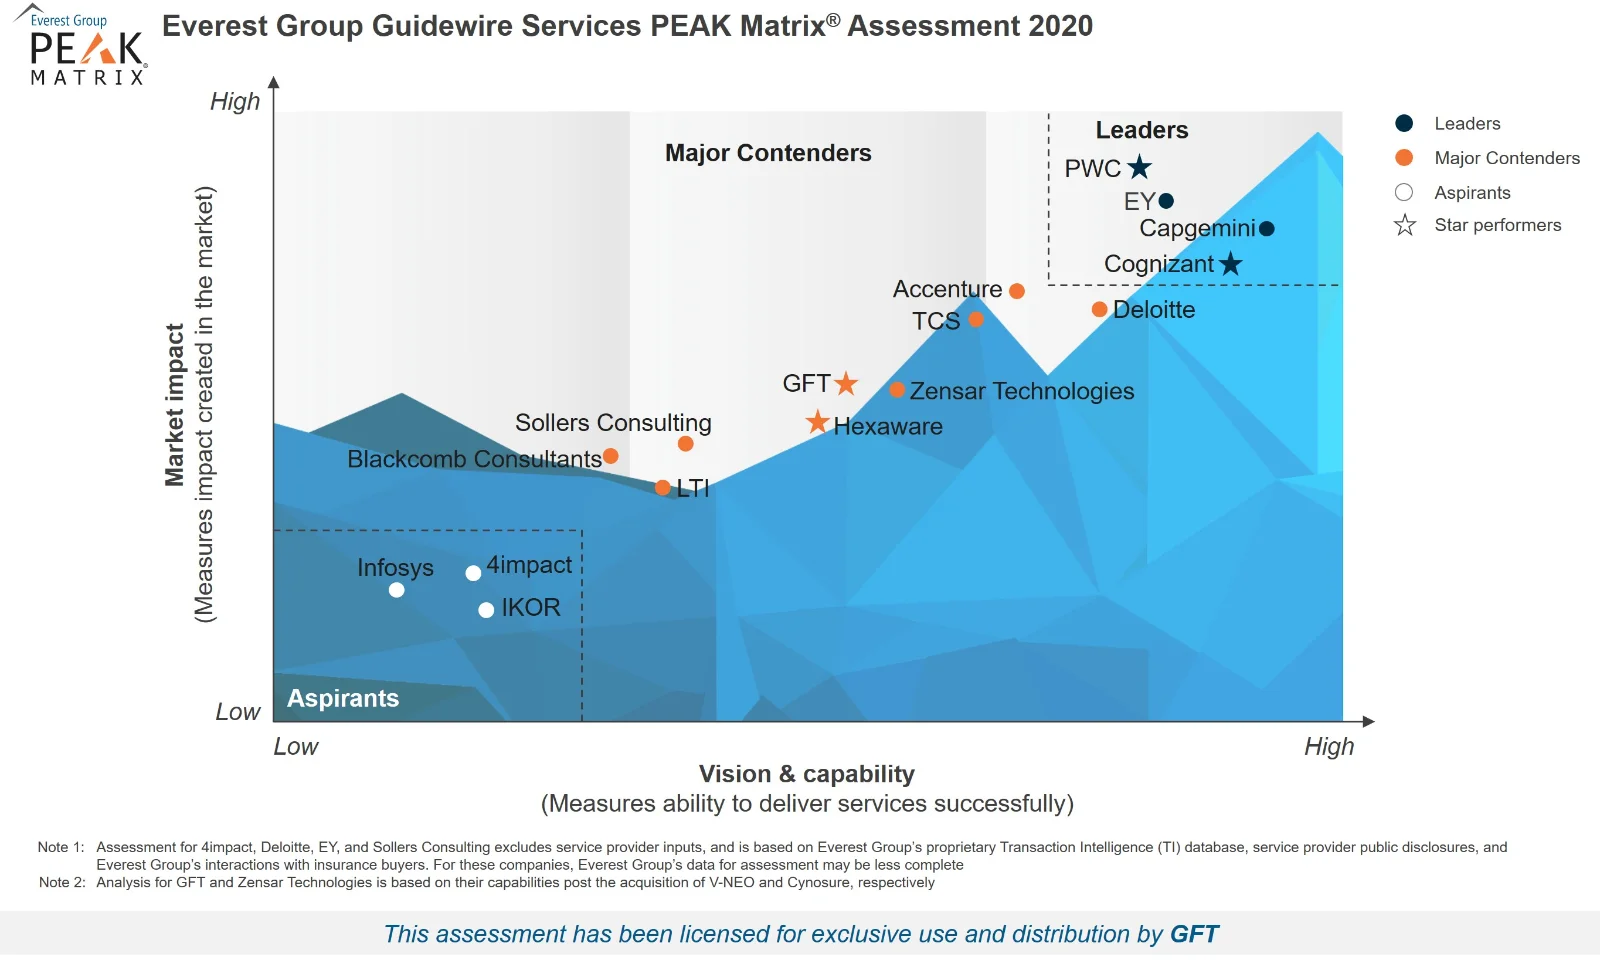 GFT has improved its competitive positioning, earning Major Contender and Star Performer recognition on Everest Group’s Guidewire Services PEAK® Matrix Assessment 2020 given.